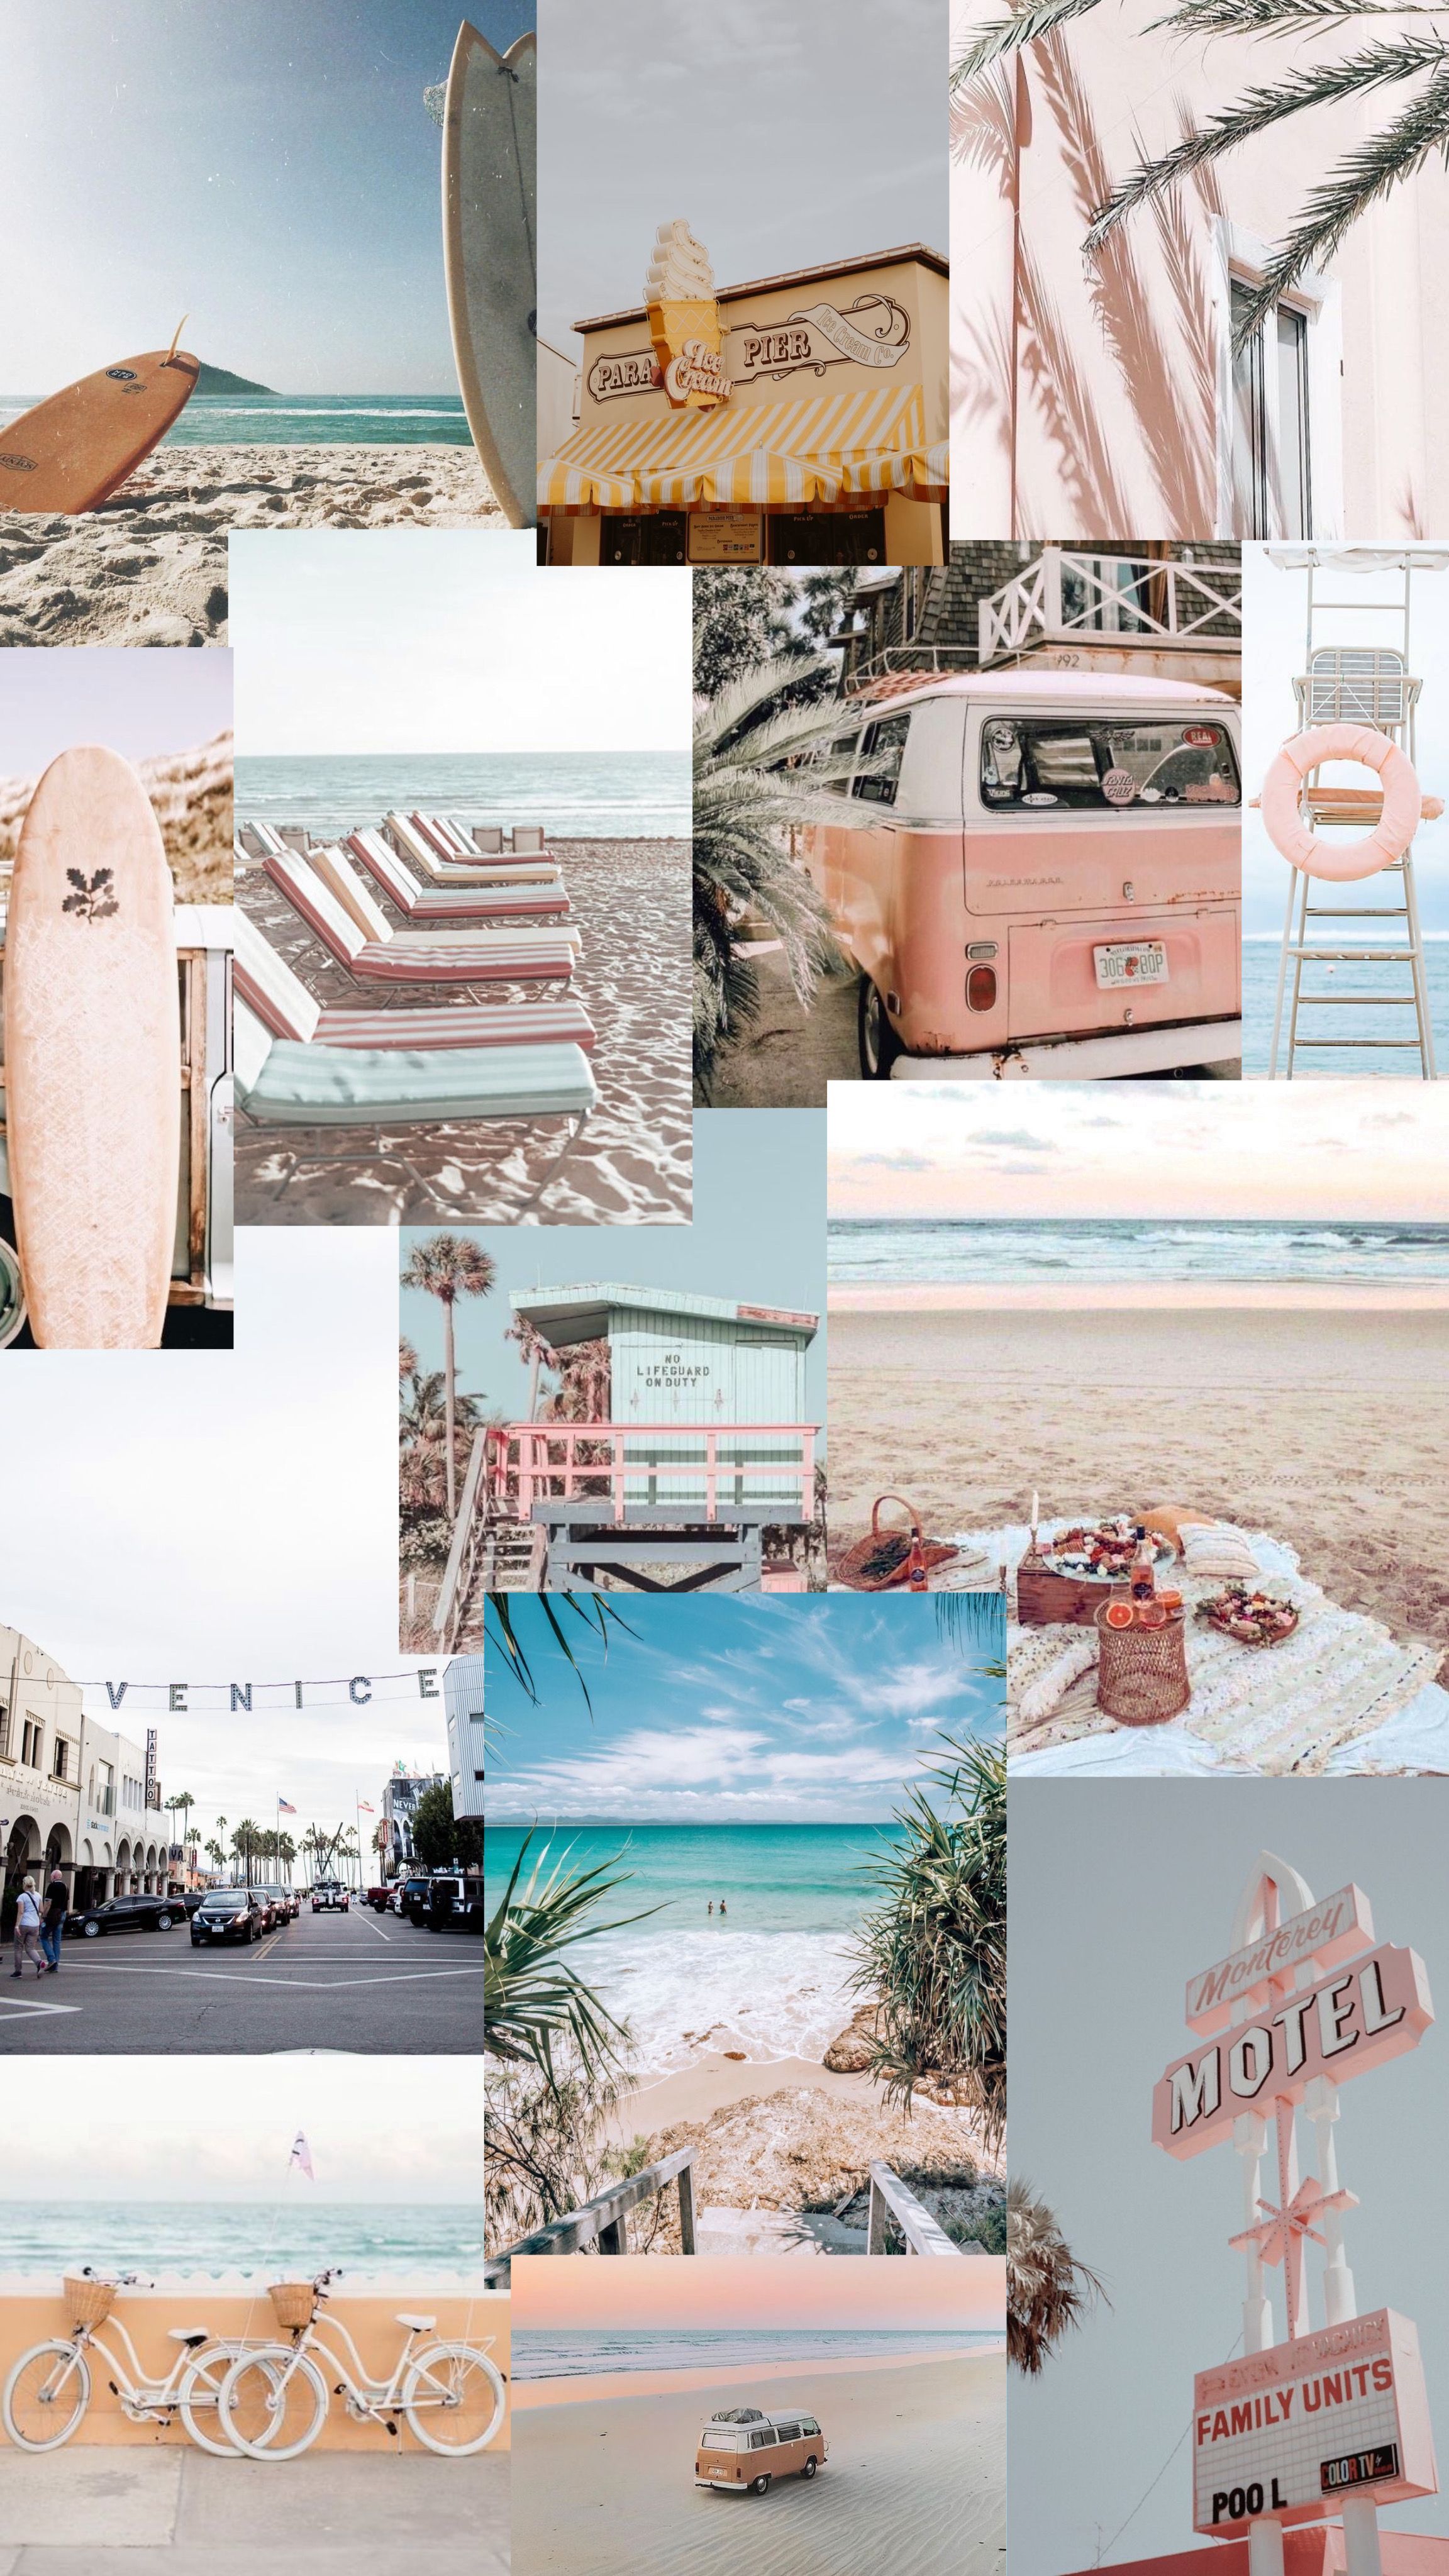 beach summer collage wallpaper. iPhone wallpaper landscape, Beach wall collage, iPhone background inspiration